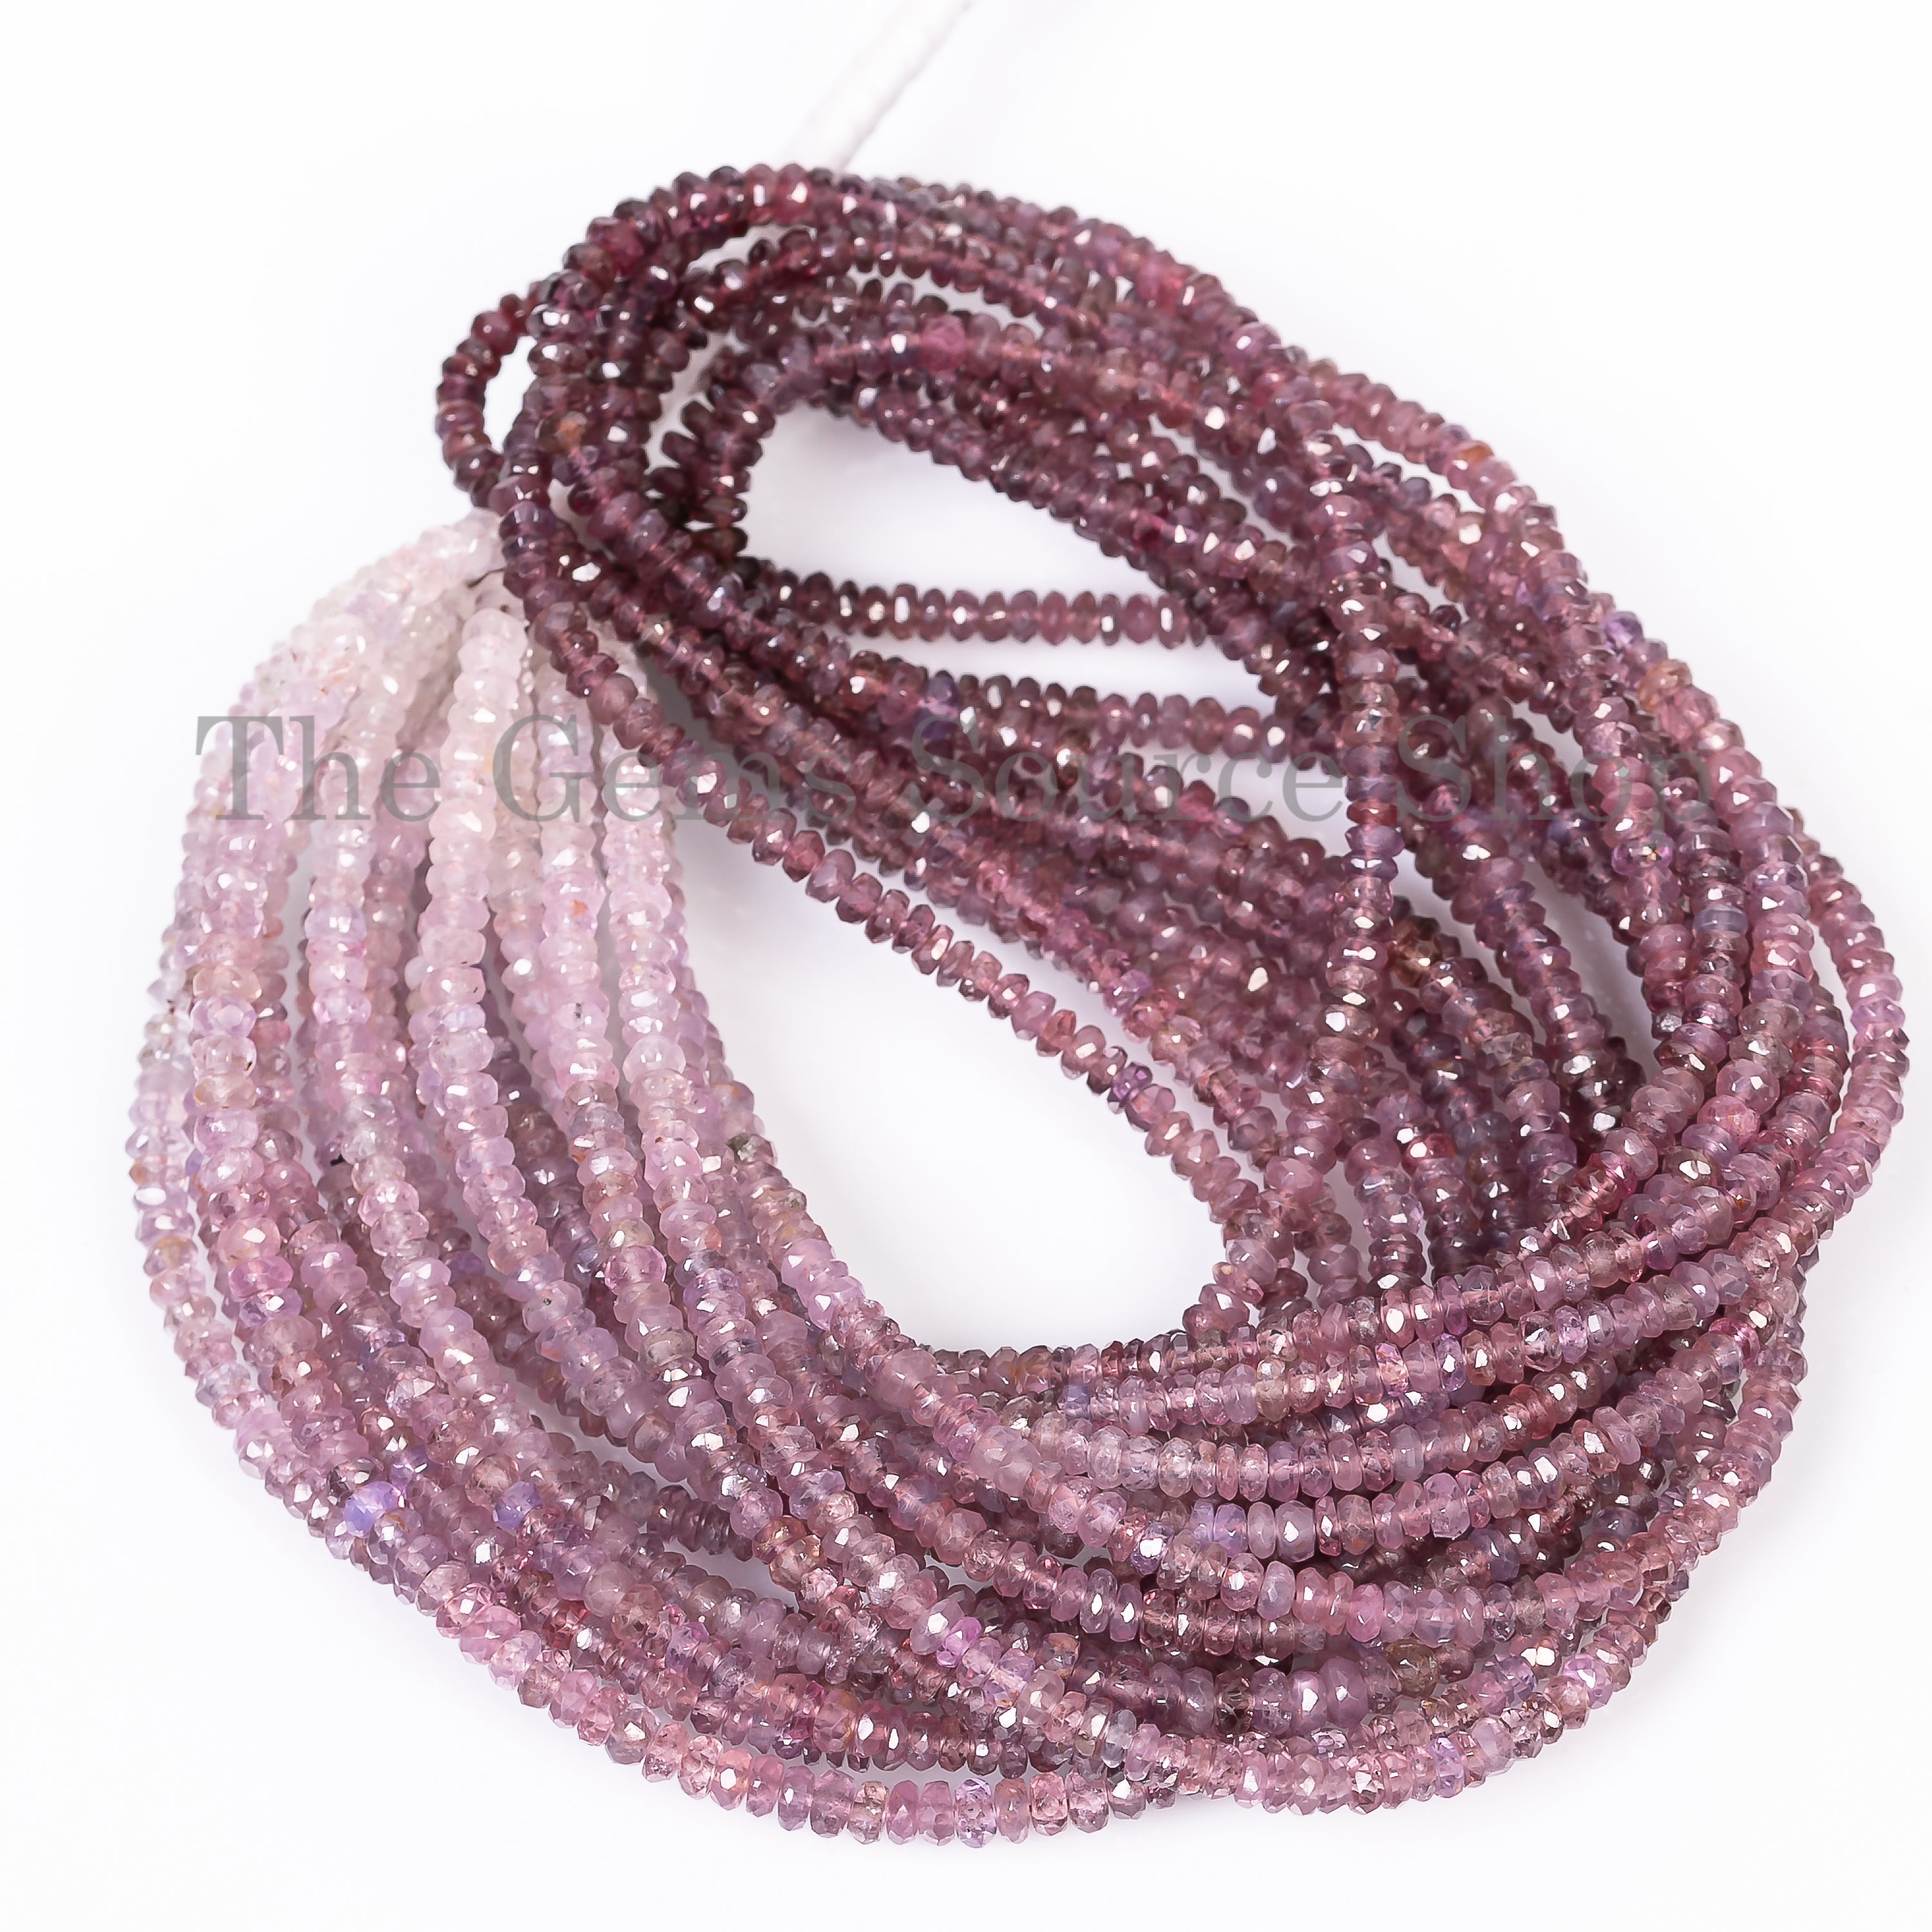 3.5mm Spinel Faceted Beads, Shaded Spinel Rondelle Beads TGS-4562